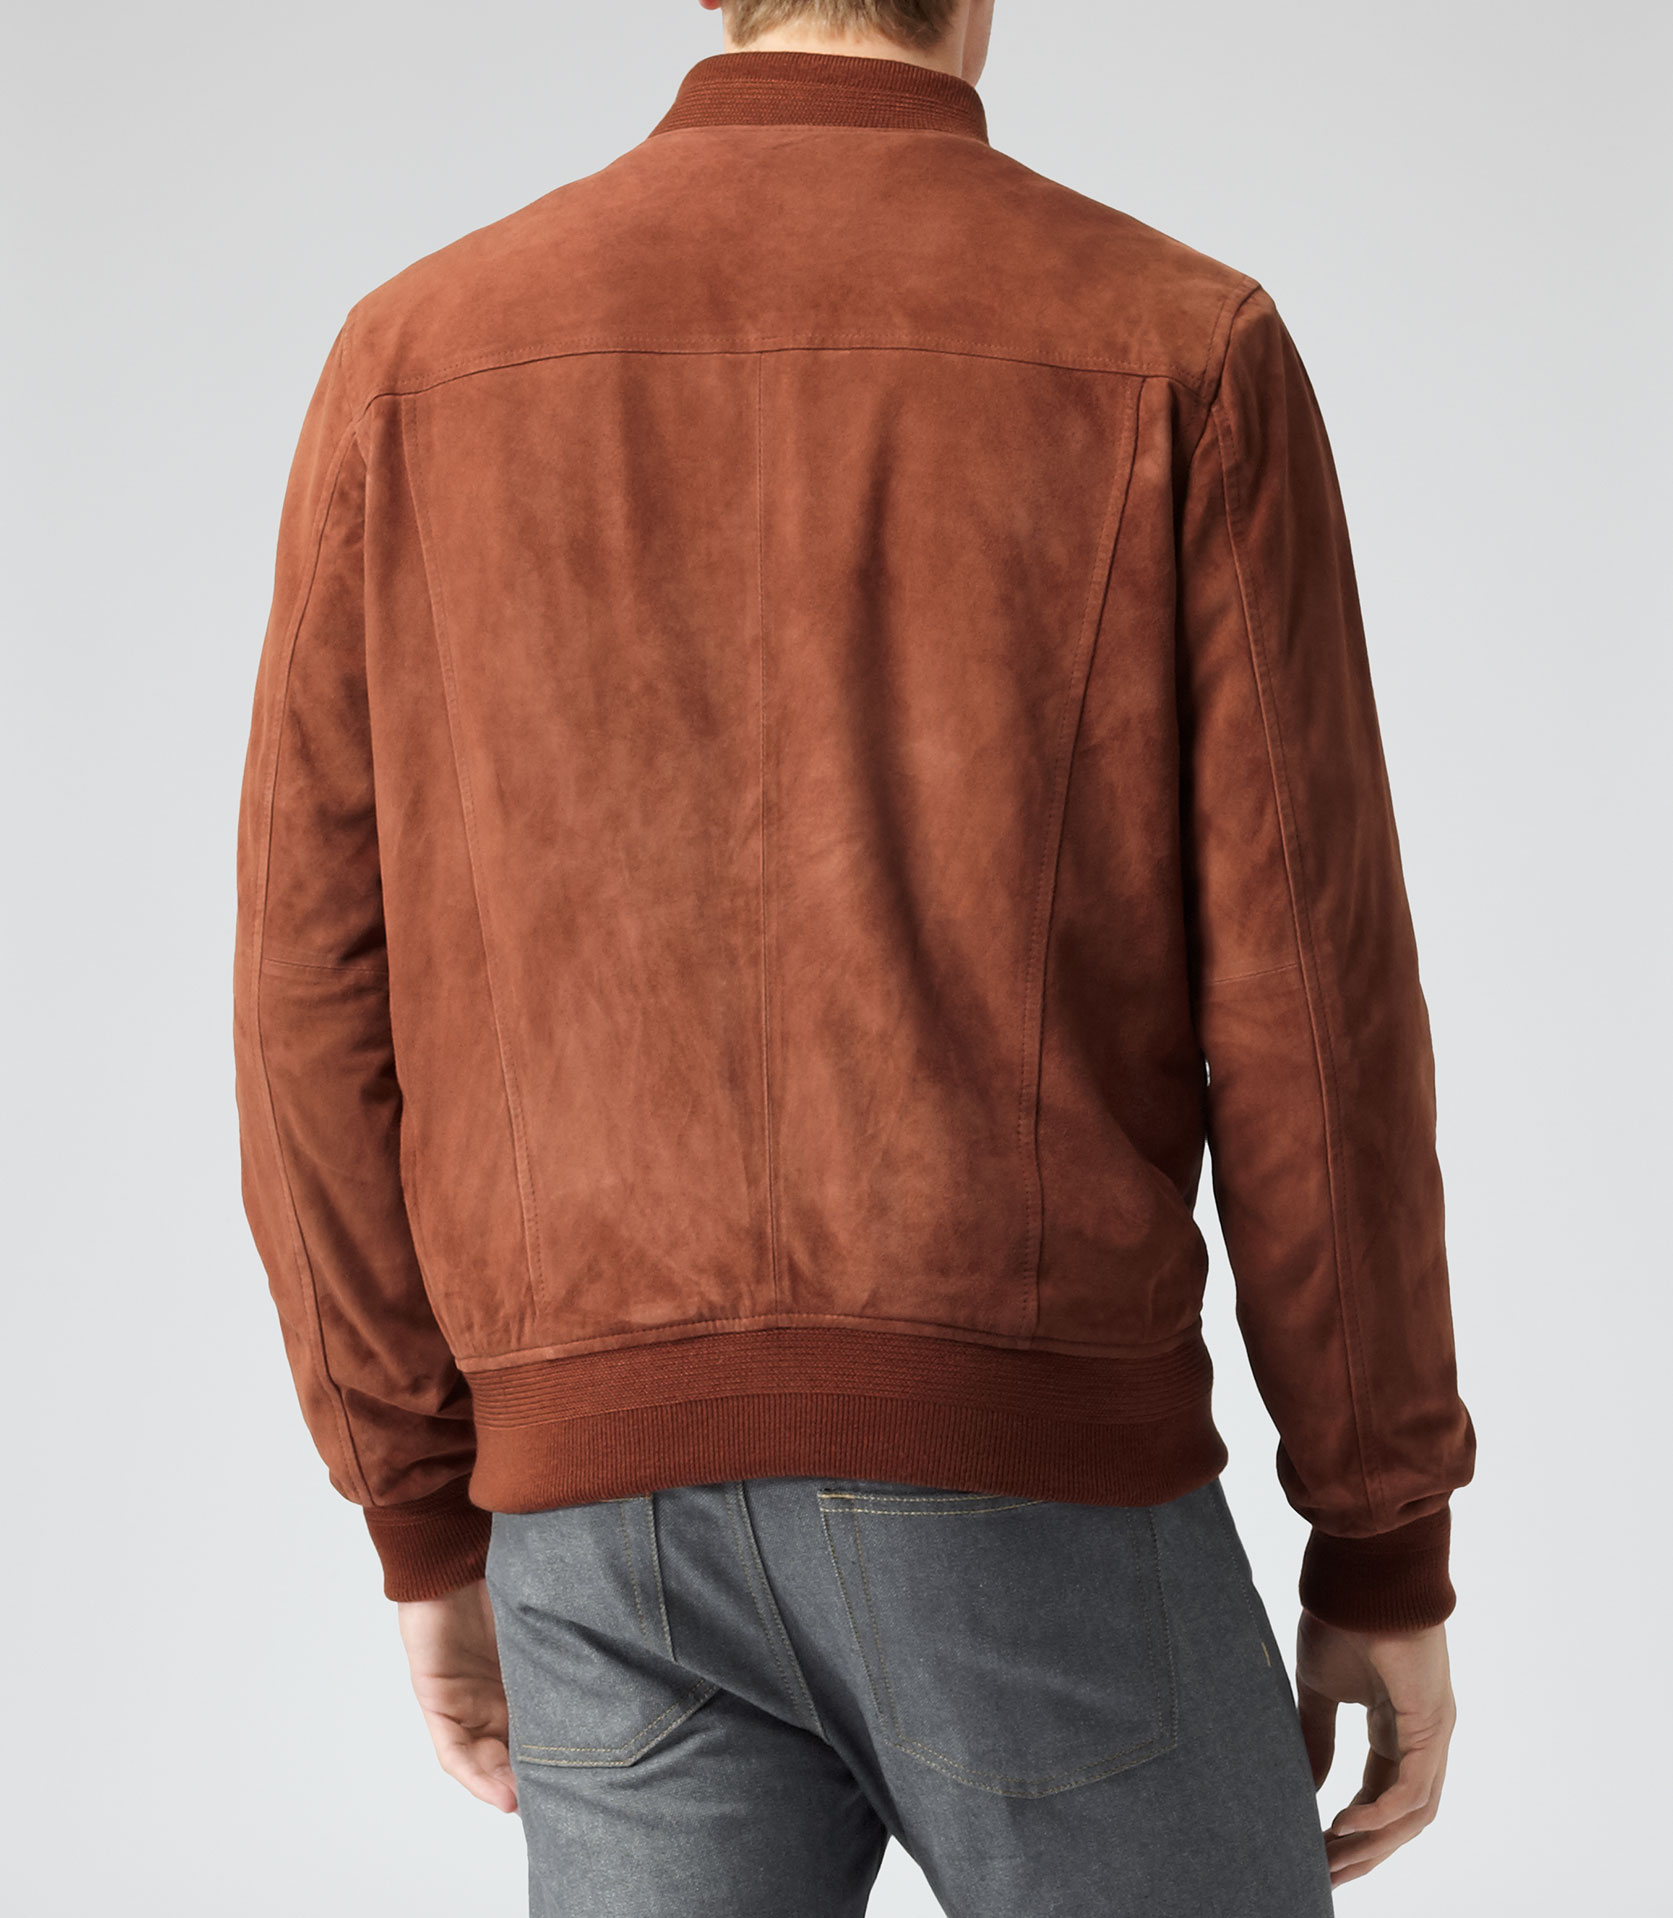 Lyst - Reiss Madson Suede Bomber Jacket in Brown for Men